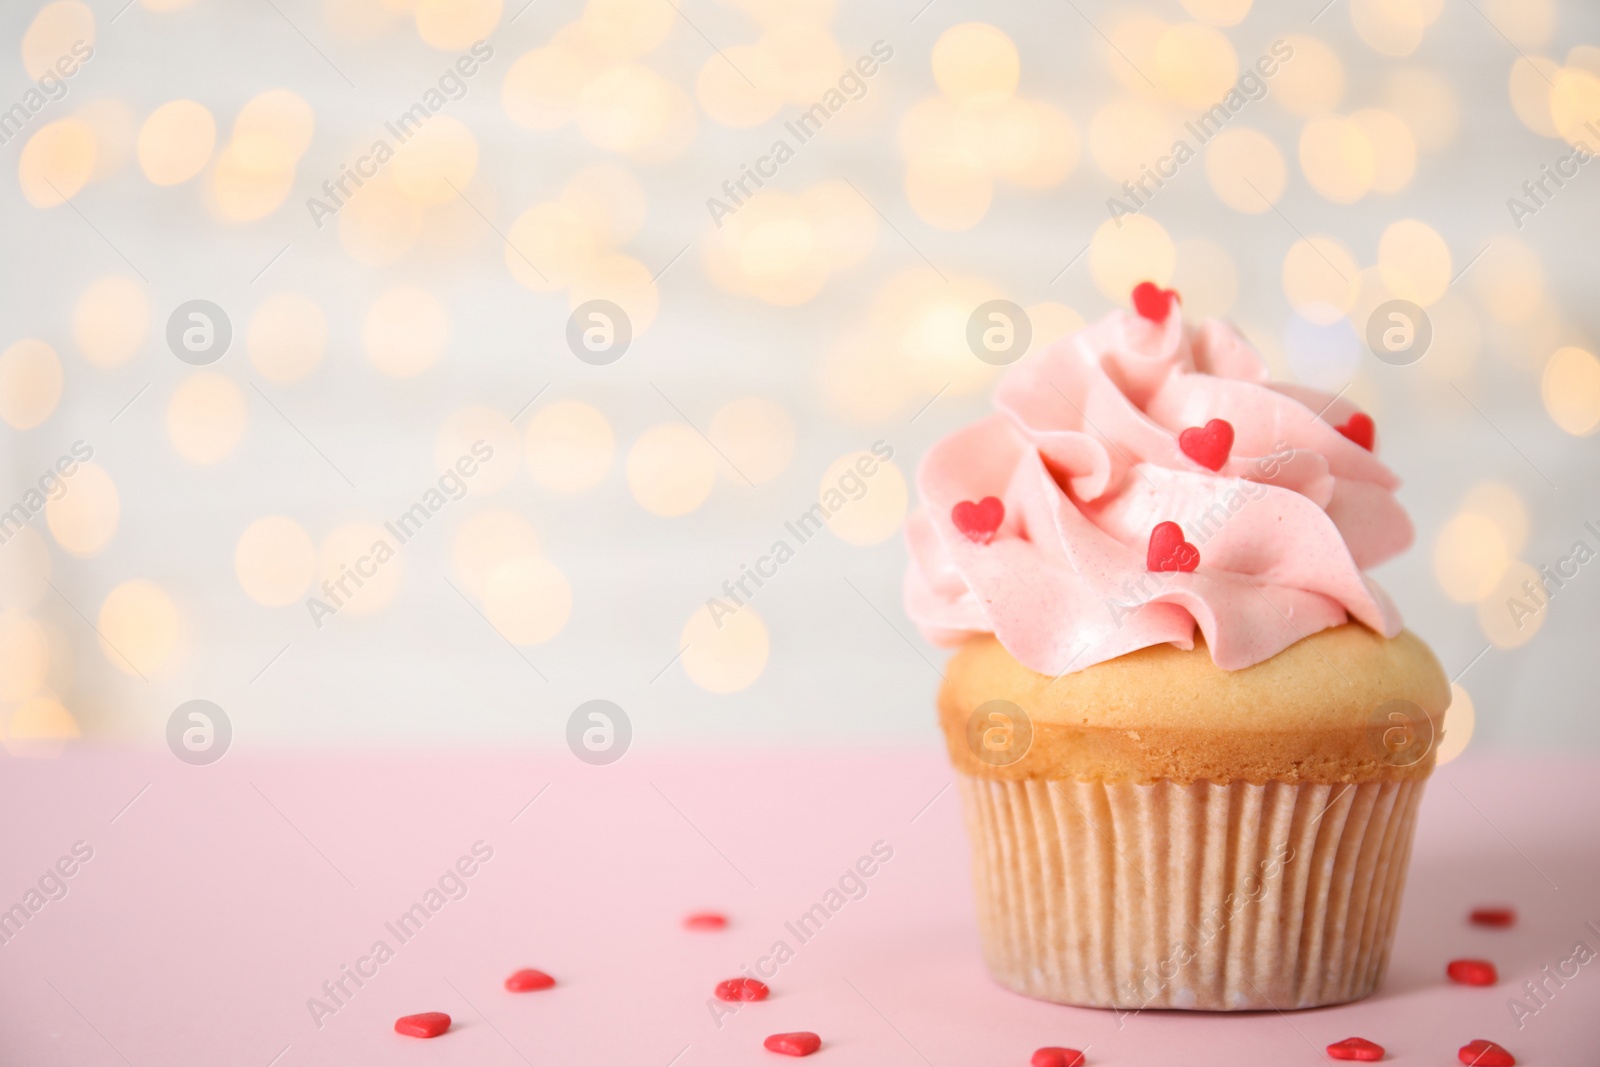 Photo of Tasty cupcake on pink table against blurred lights, space for text. Valentine's Day celebration